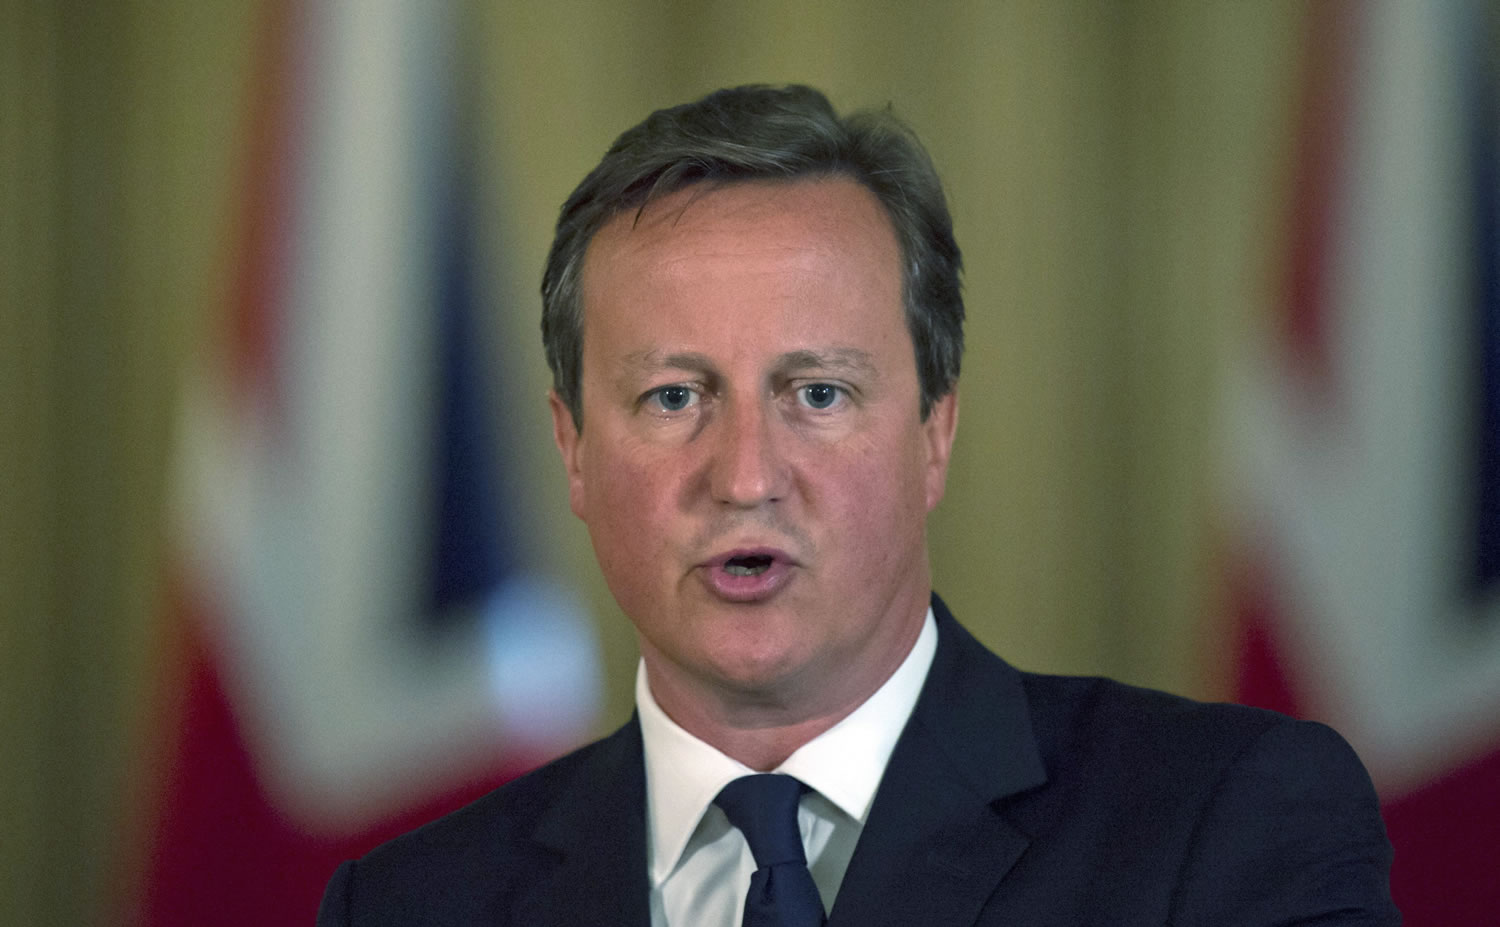 British Prime Minister David Cameron delivers a report to the media in Downing Street, London, on Friday Aug. 29.